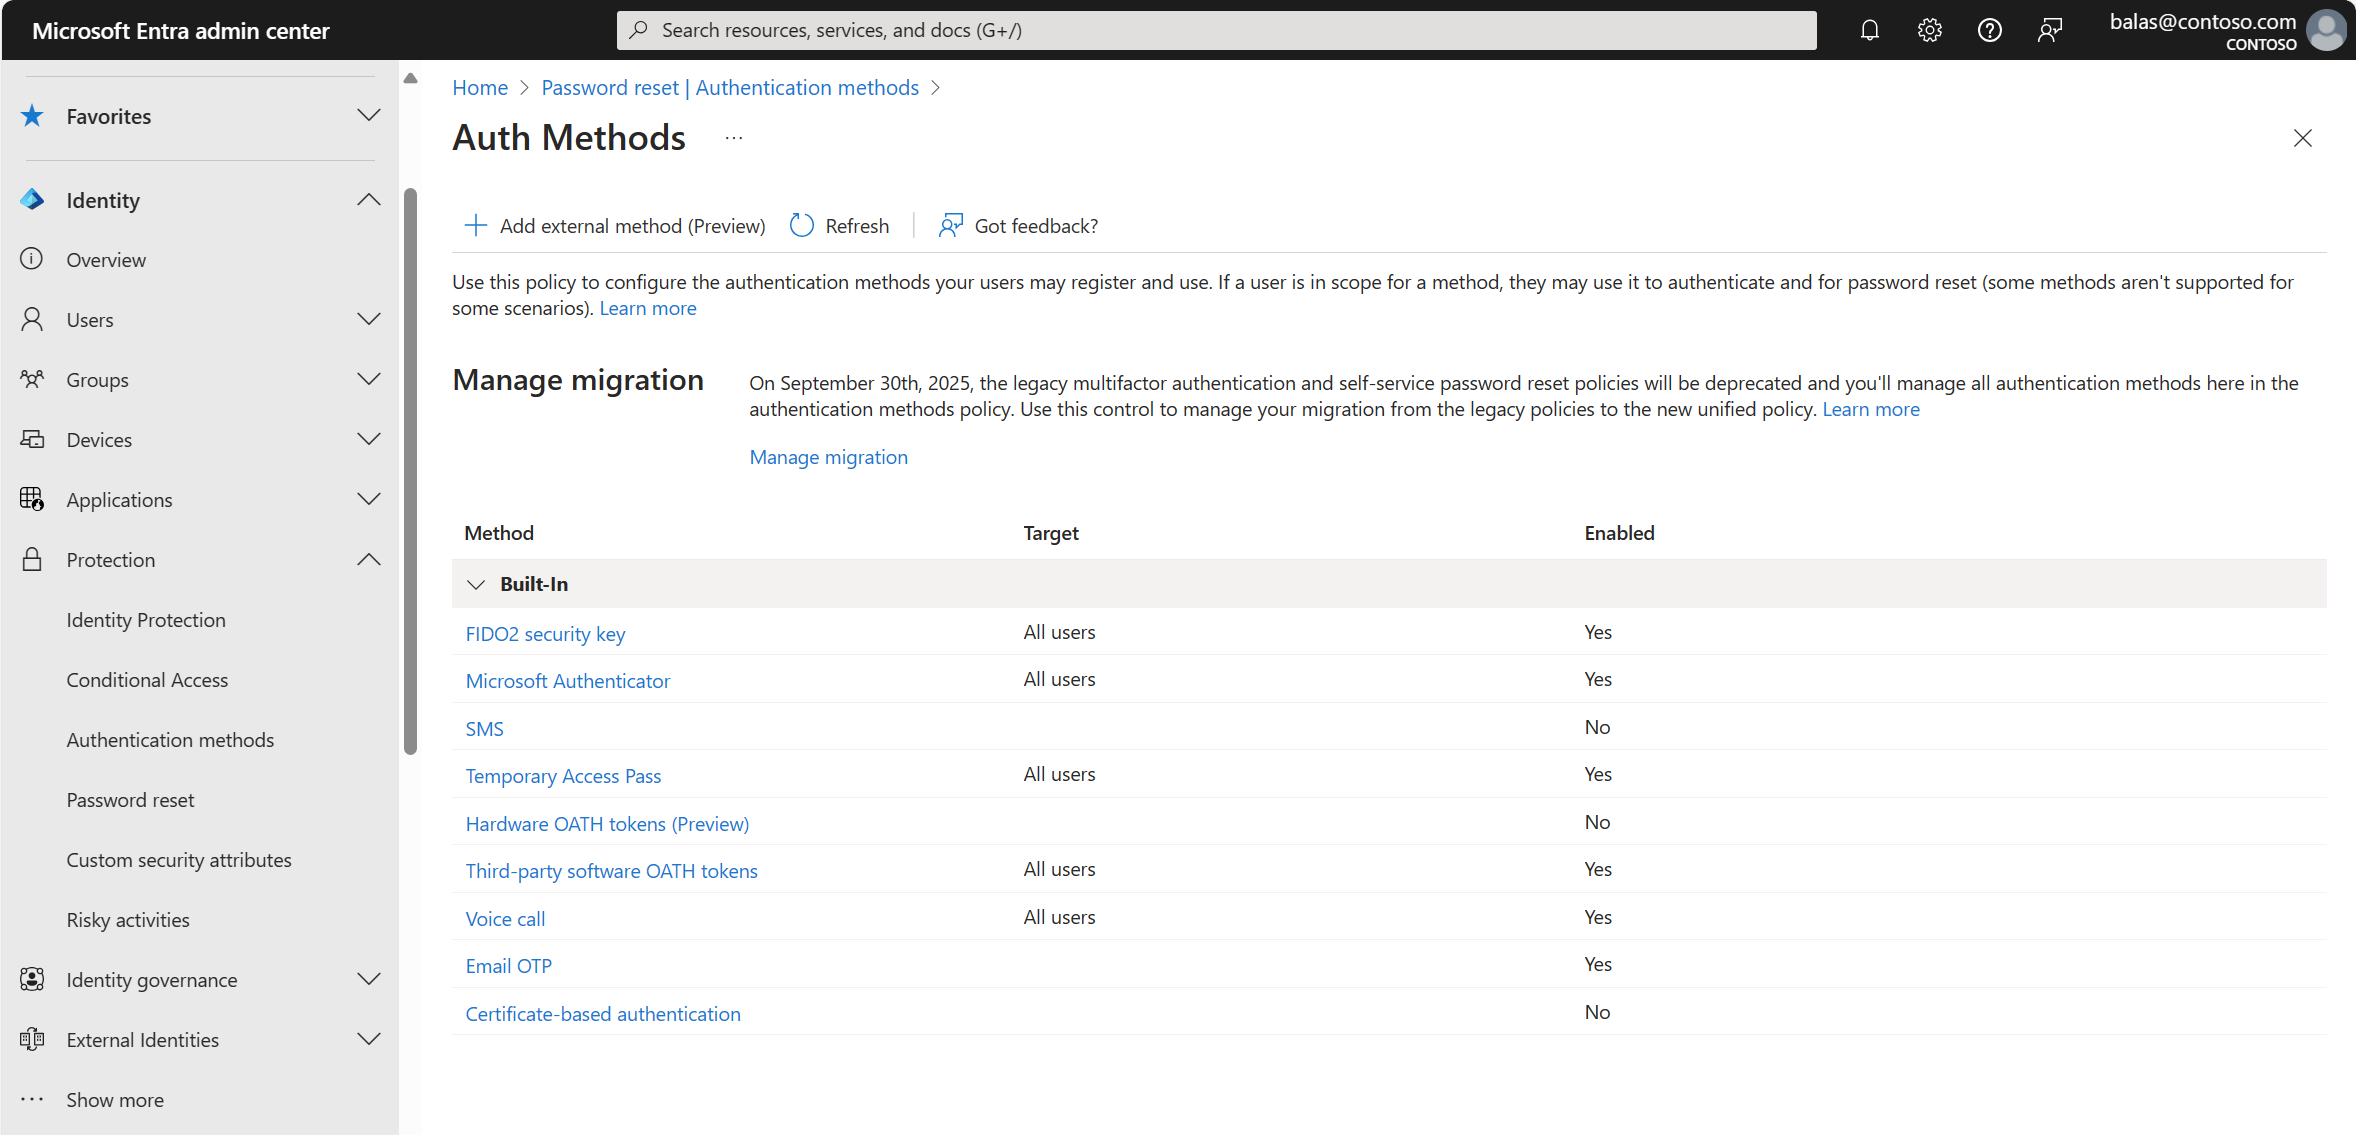 Screenshot of the Authentication methods policy for Microsoft Entra ID.